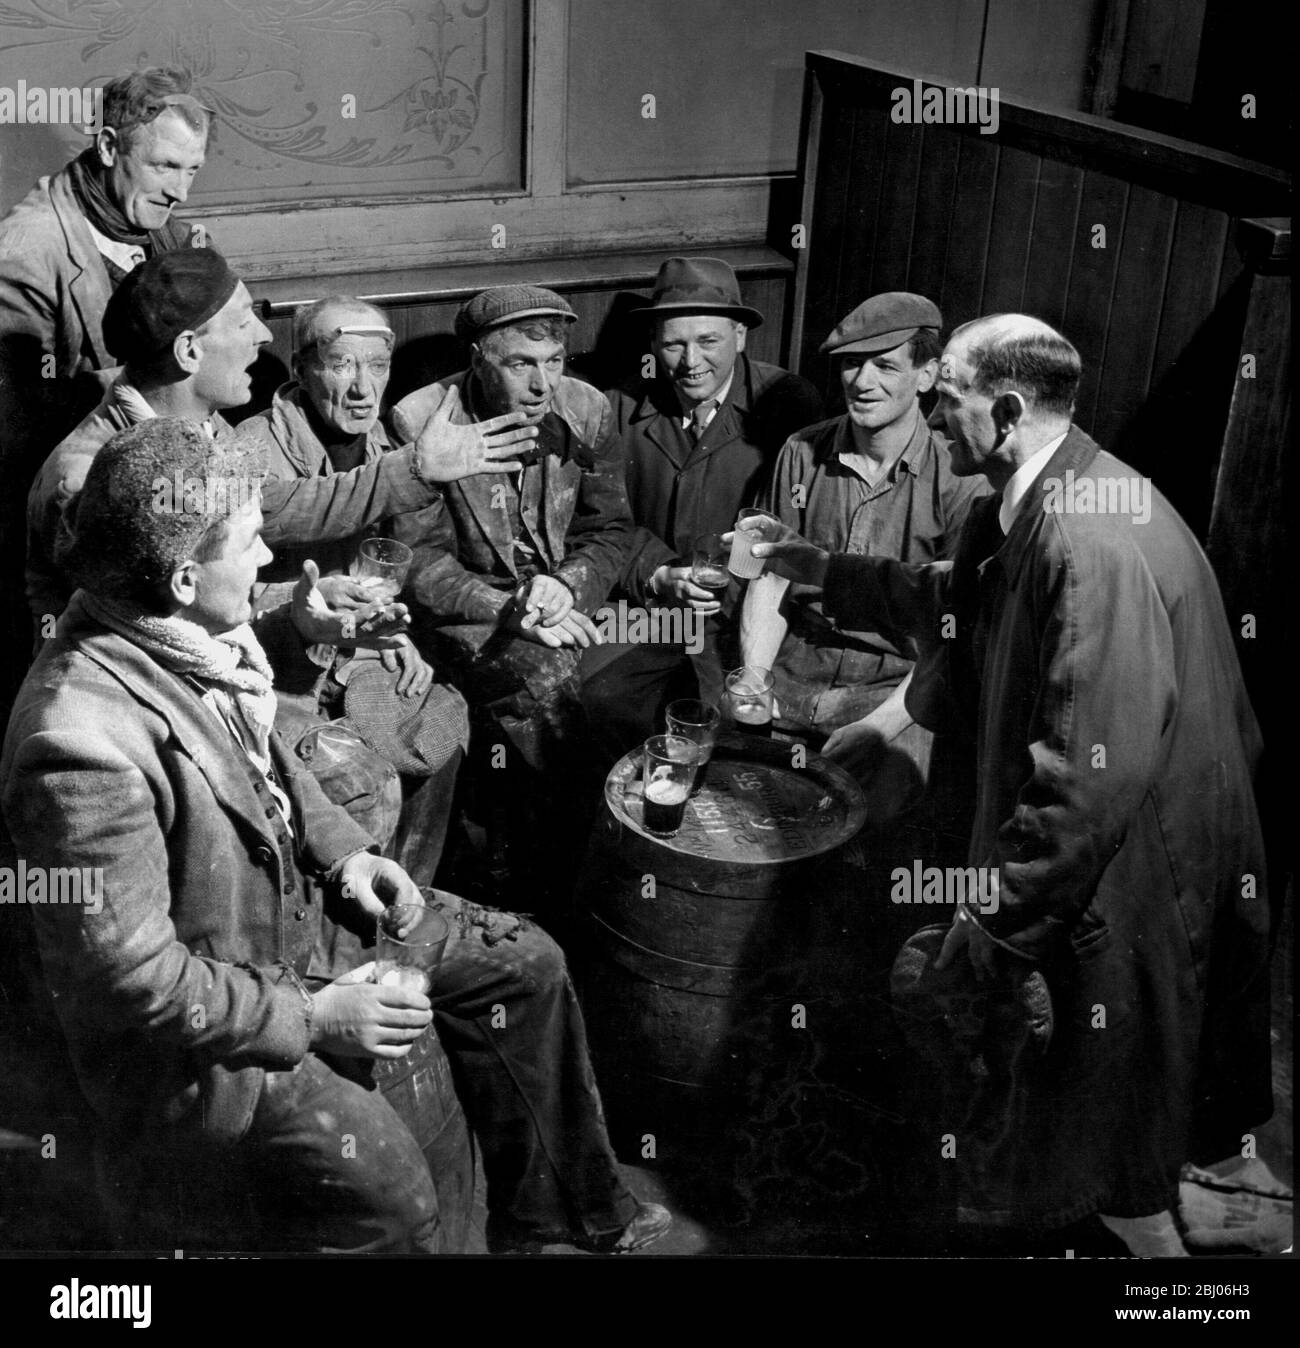 Labour Candidate discusses politics and Labour problems with the Londonderry dockworkers over a glass of beer - 1947 Stock Photo